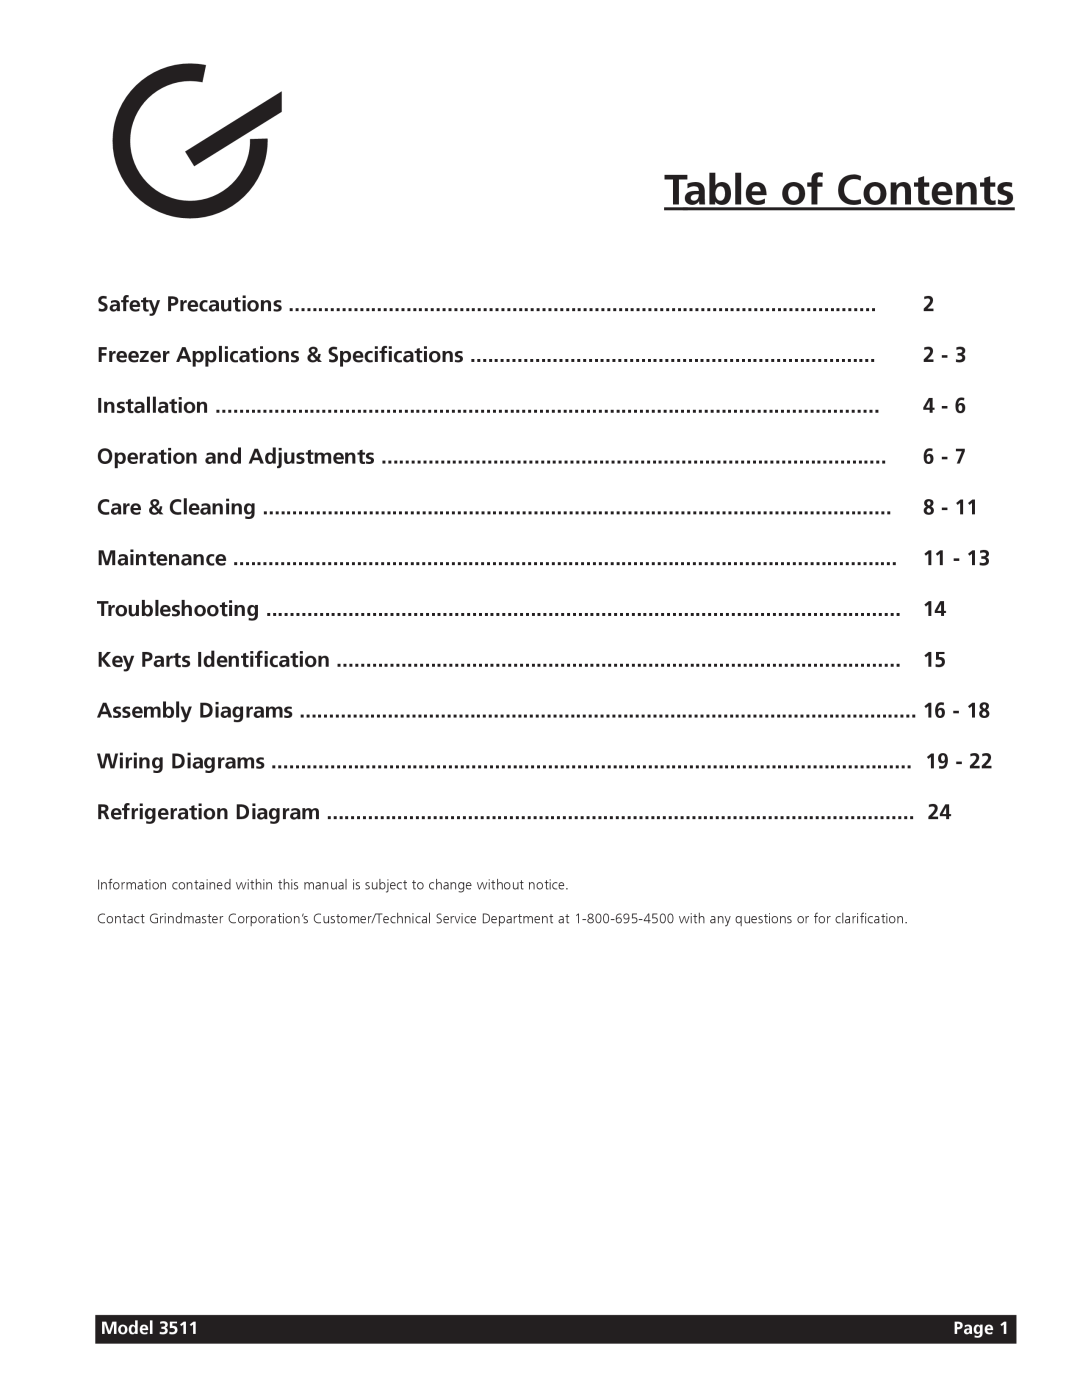 Grindmaster 3511 manual Table of Contents 